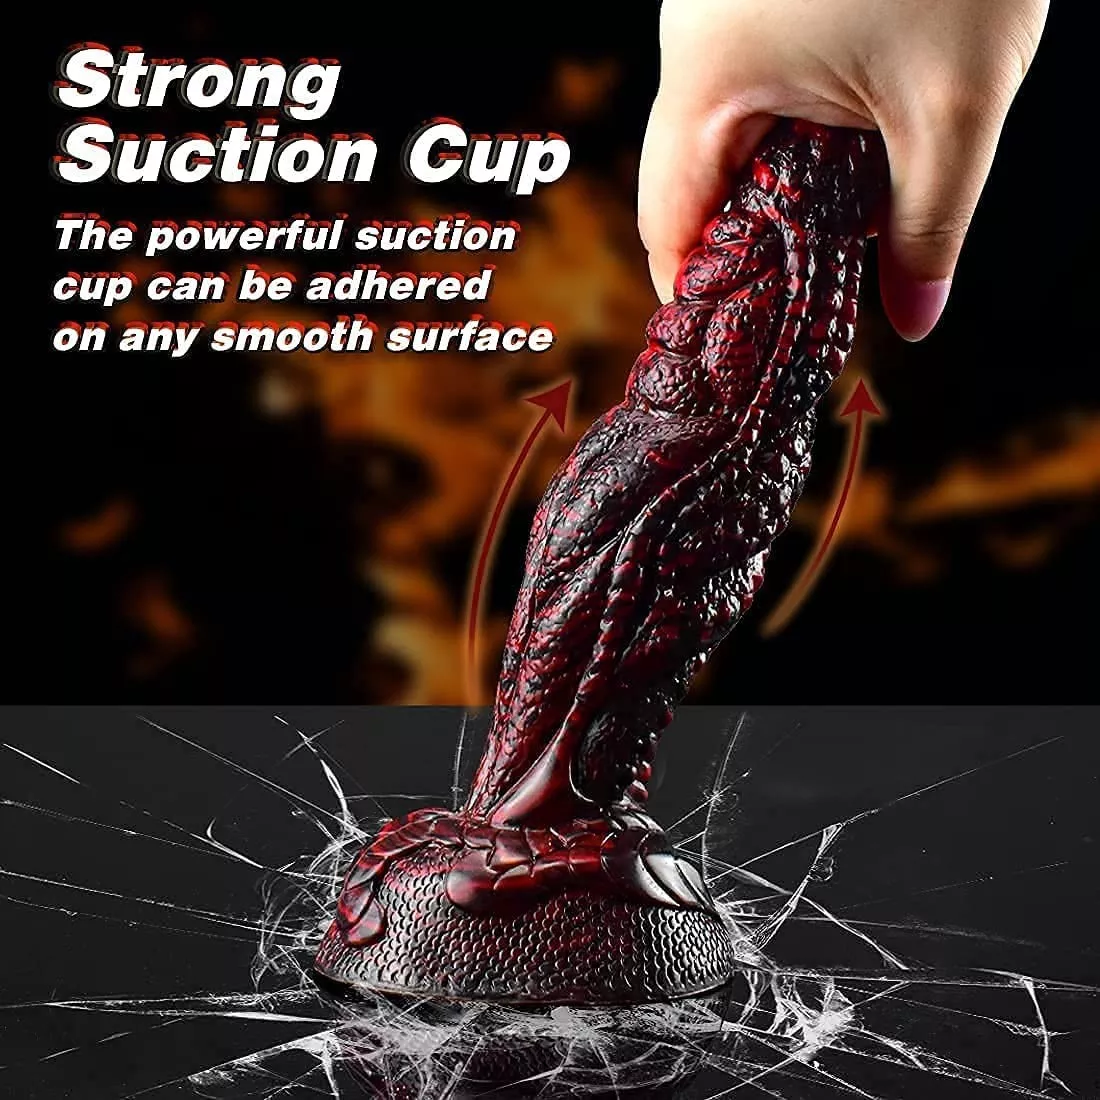 XL Dragon dildo with Strong suction cup